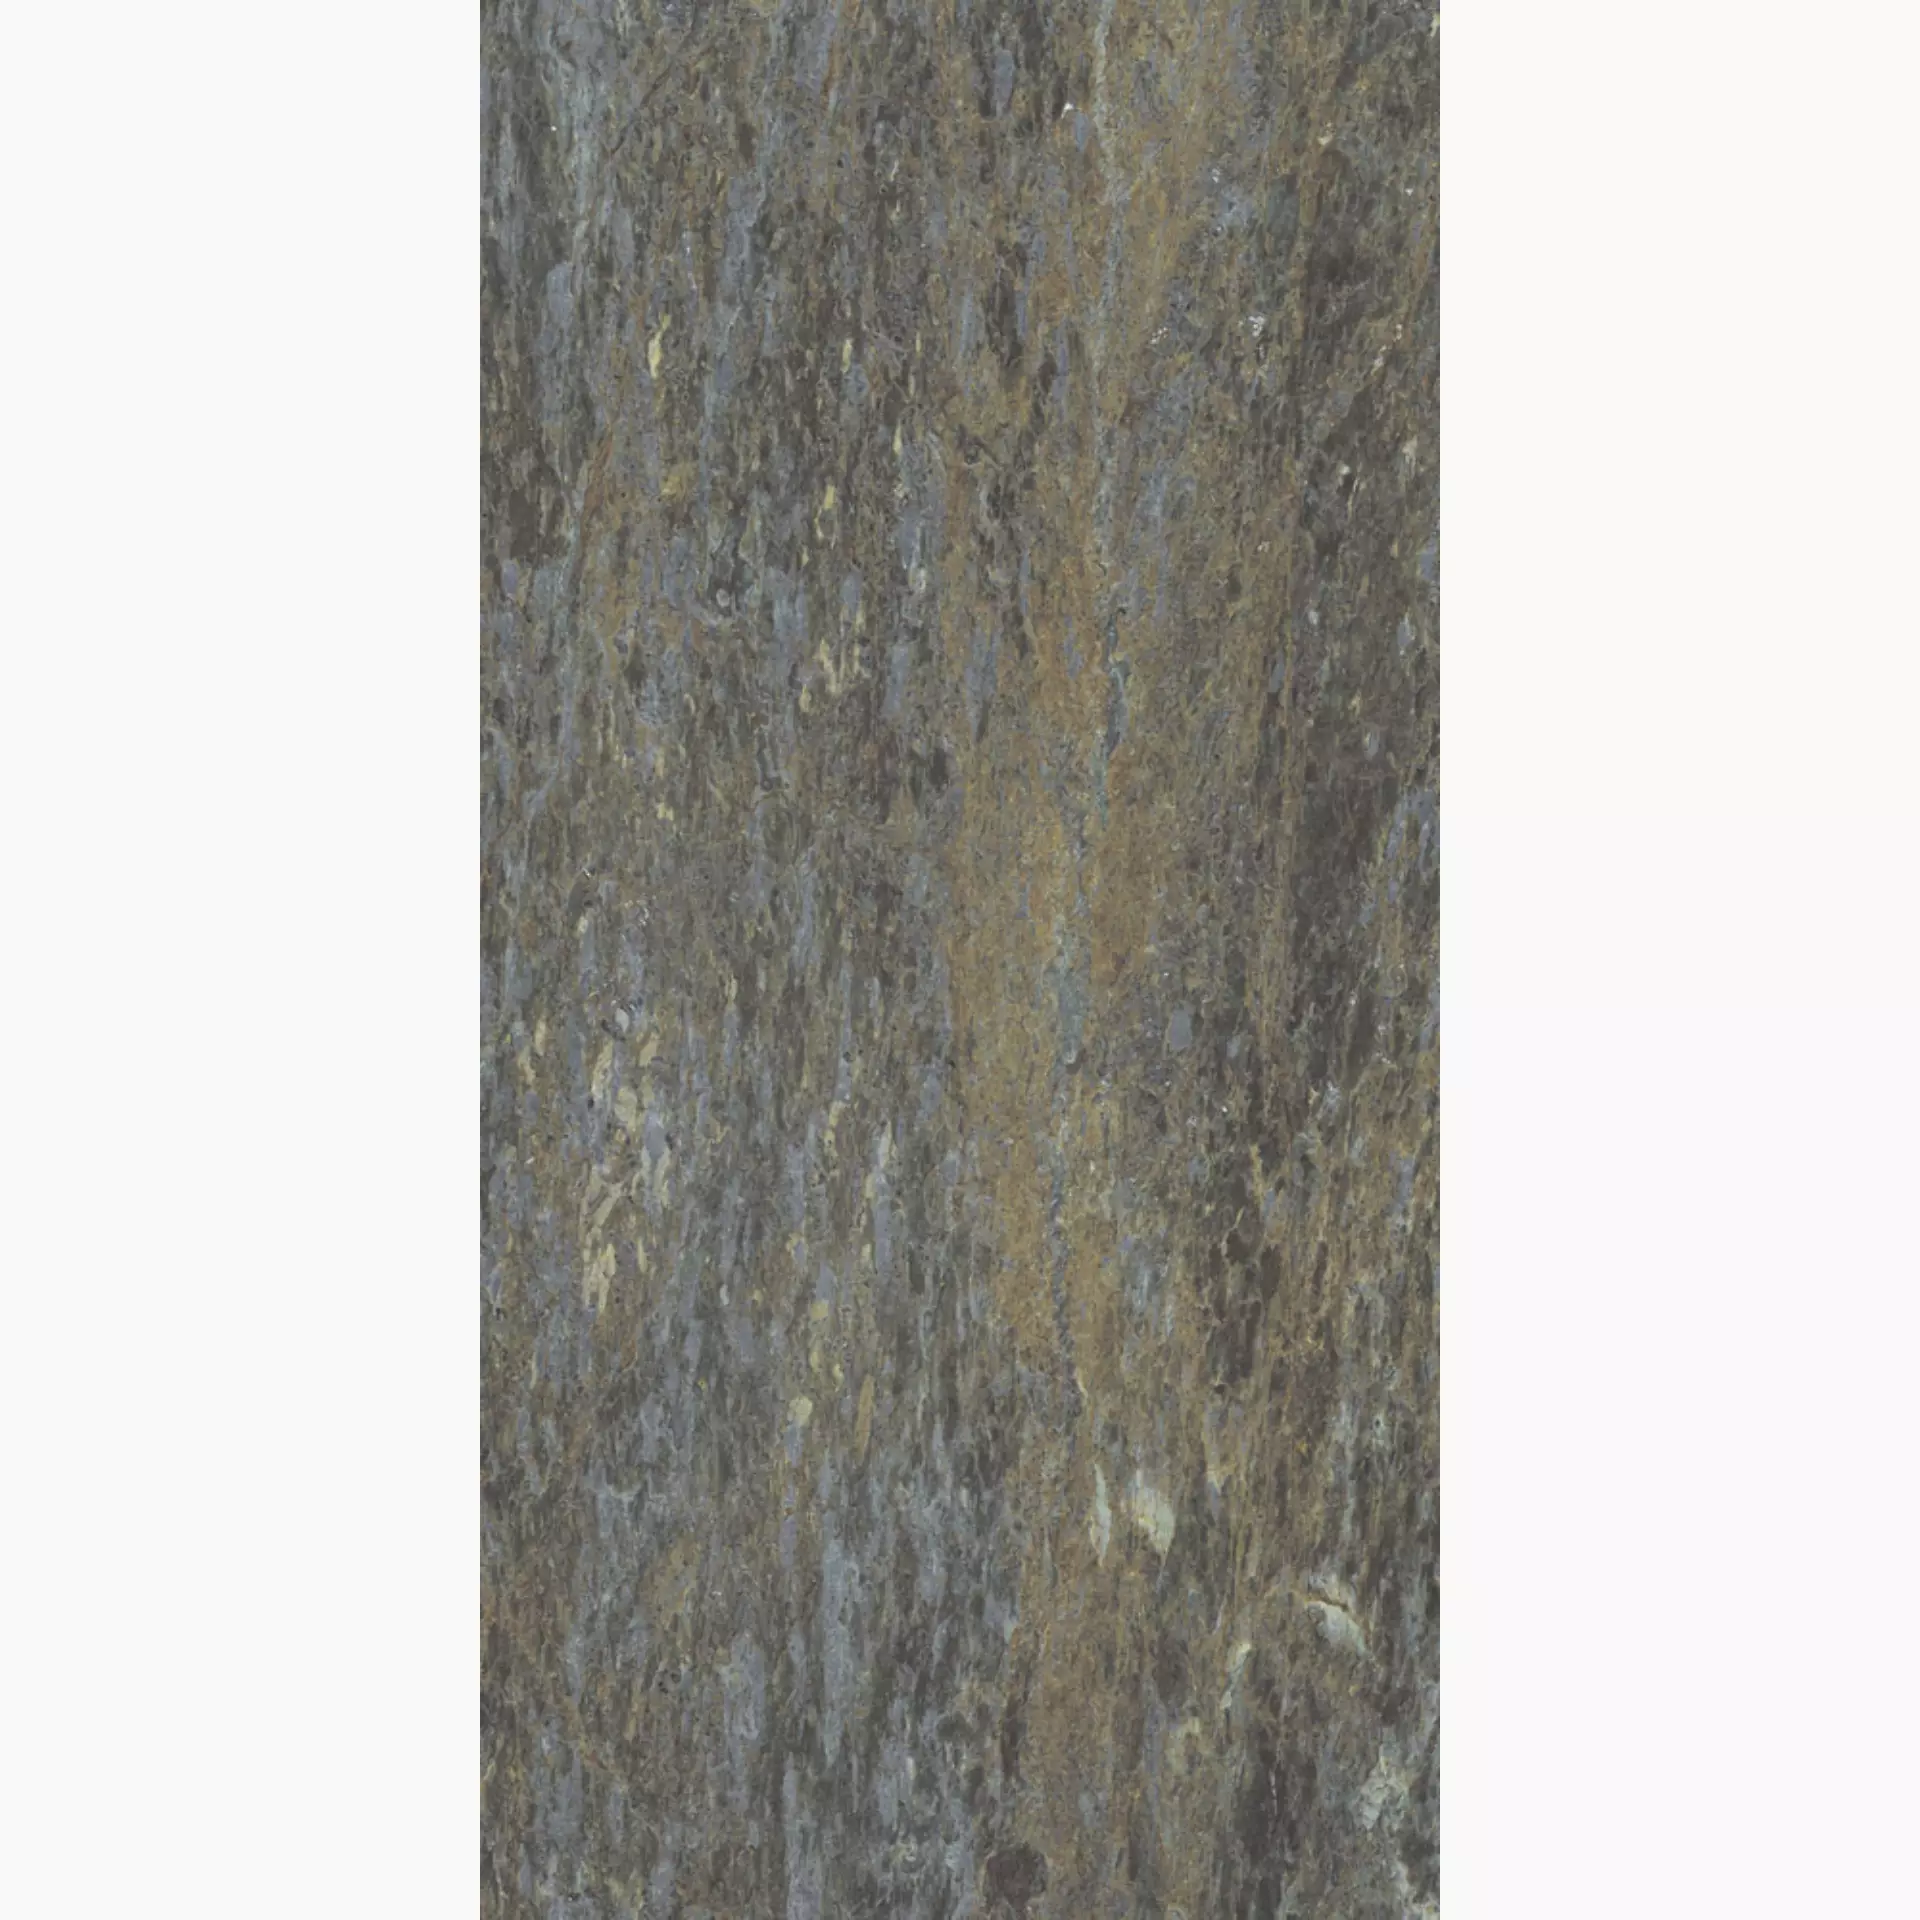 Sant Agostino Unionstone 2 Serpentino Natural CSASRPNT30 30x60cm rectified 10mm